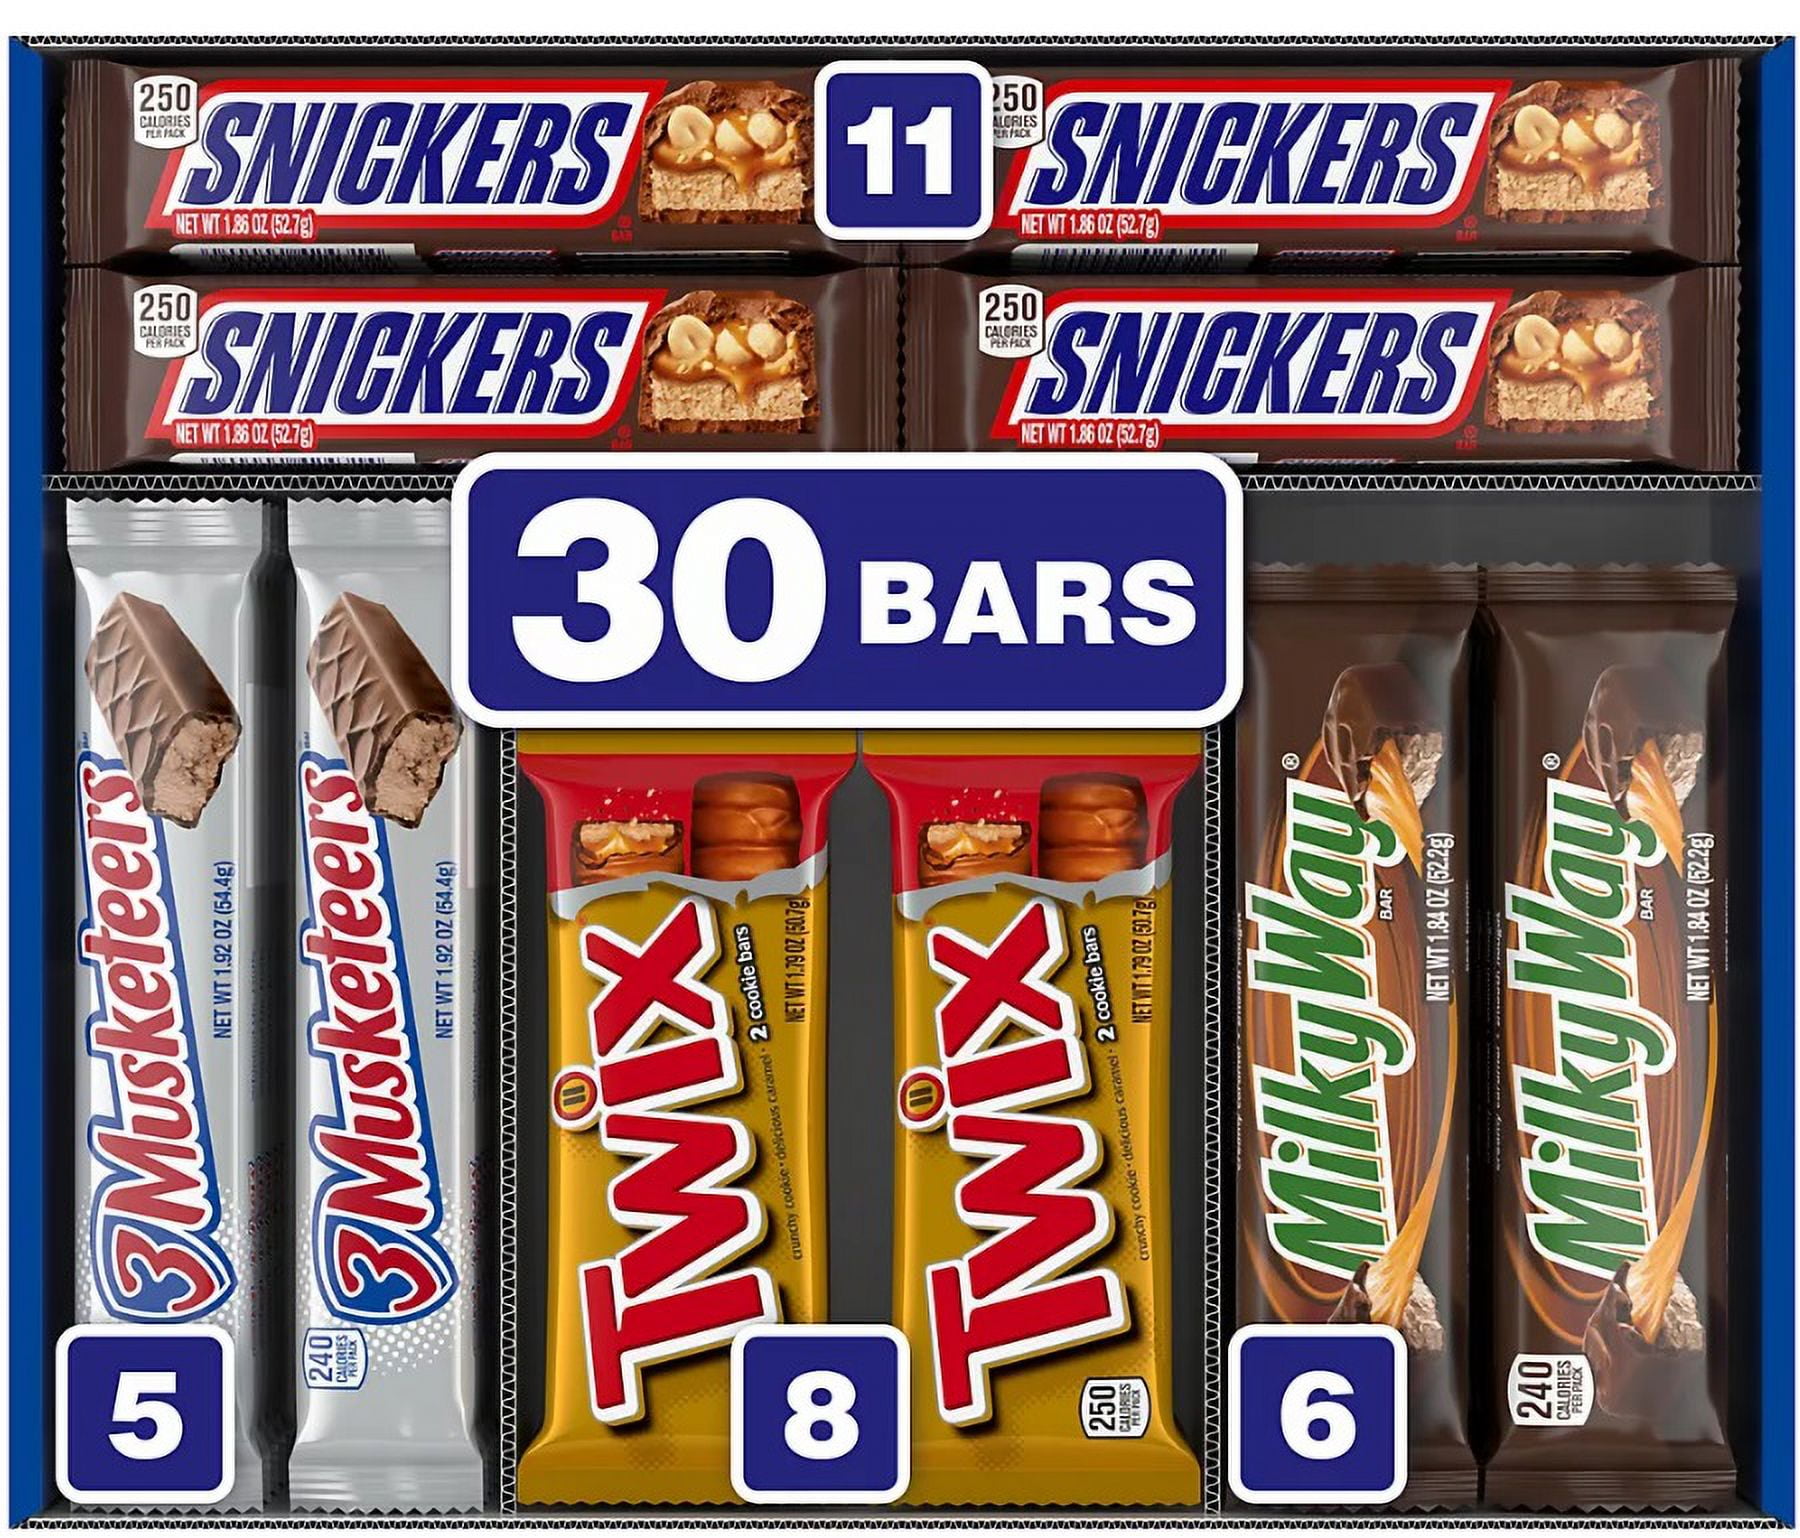 M&M's, Snickers and More Chocolate Candy Bars, Variety Pack, 30-count